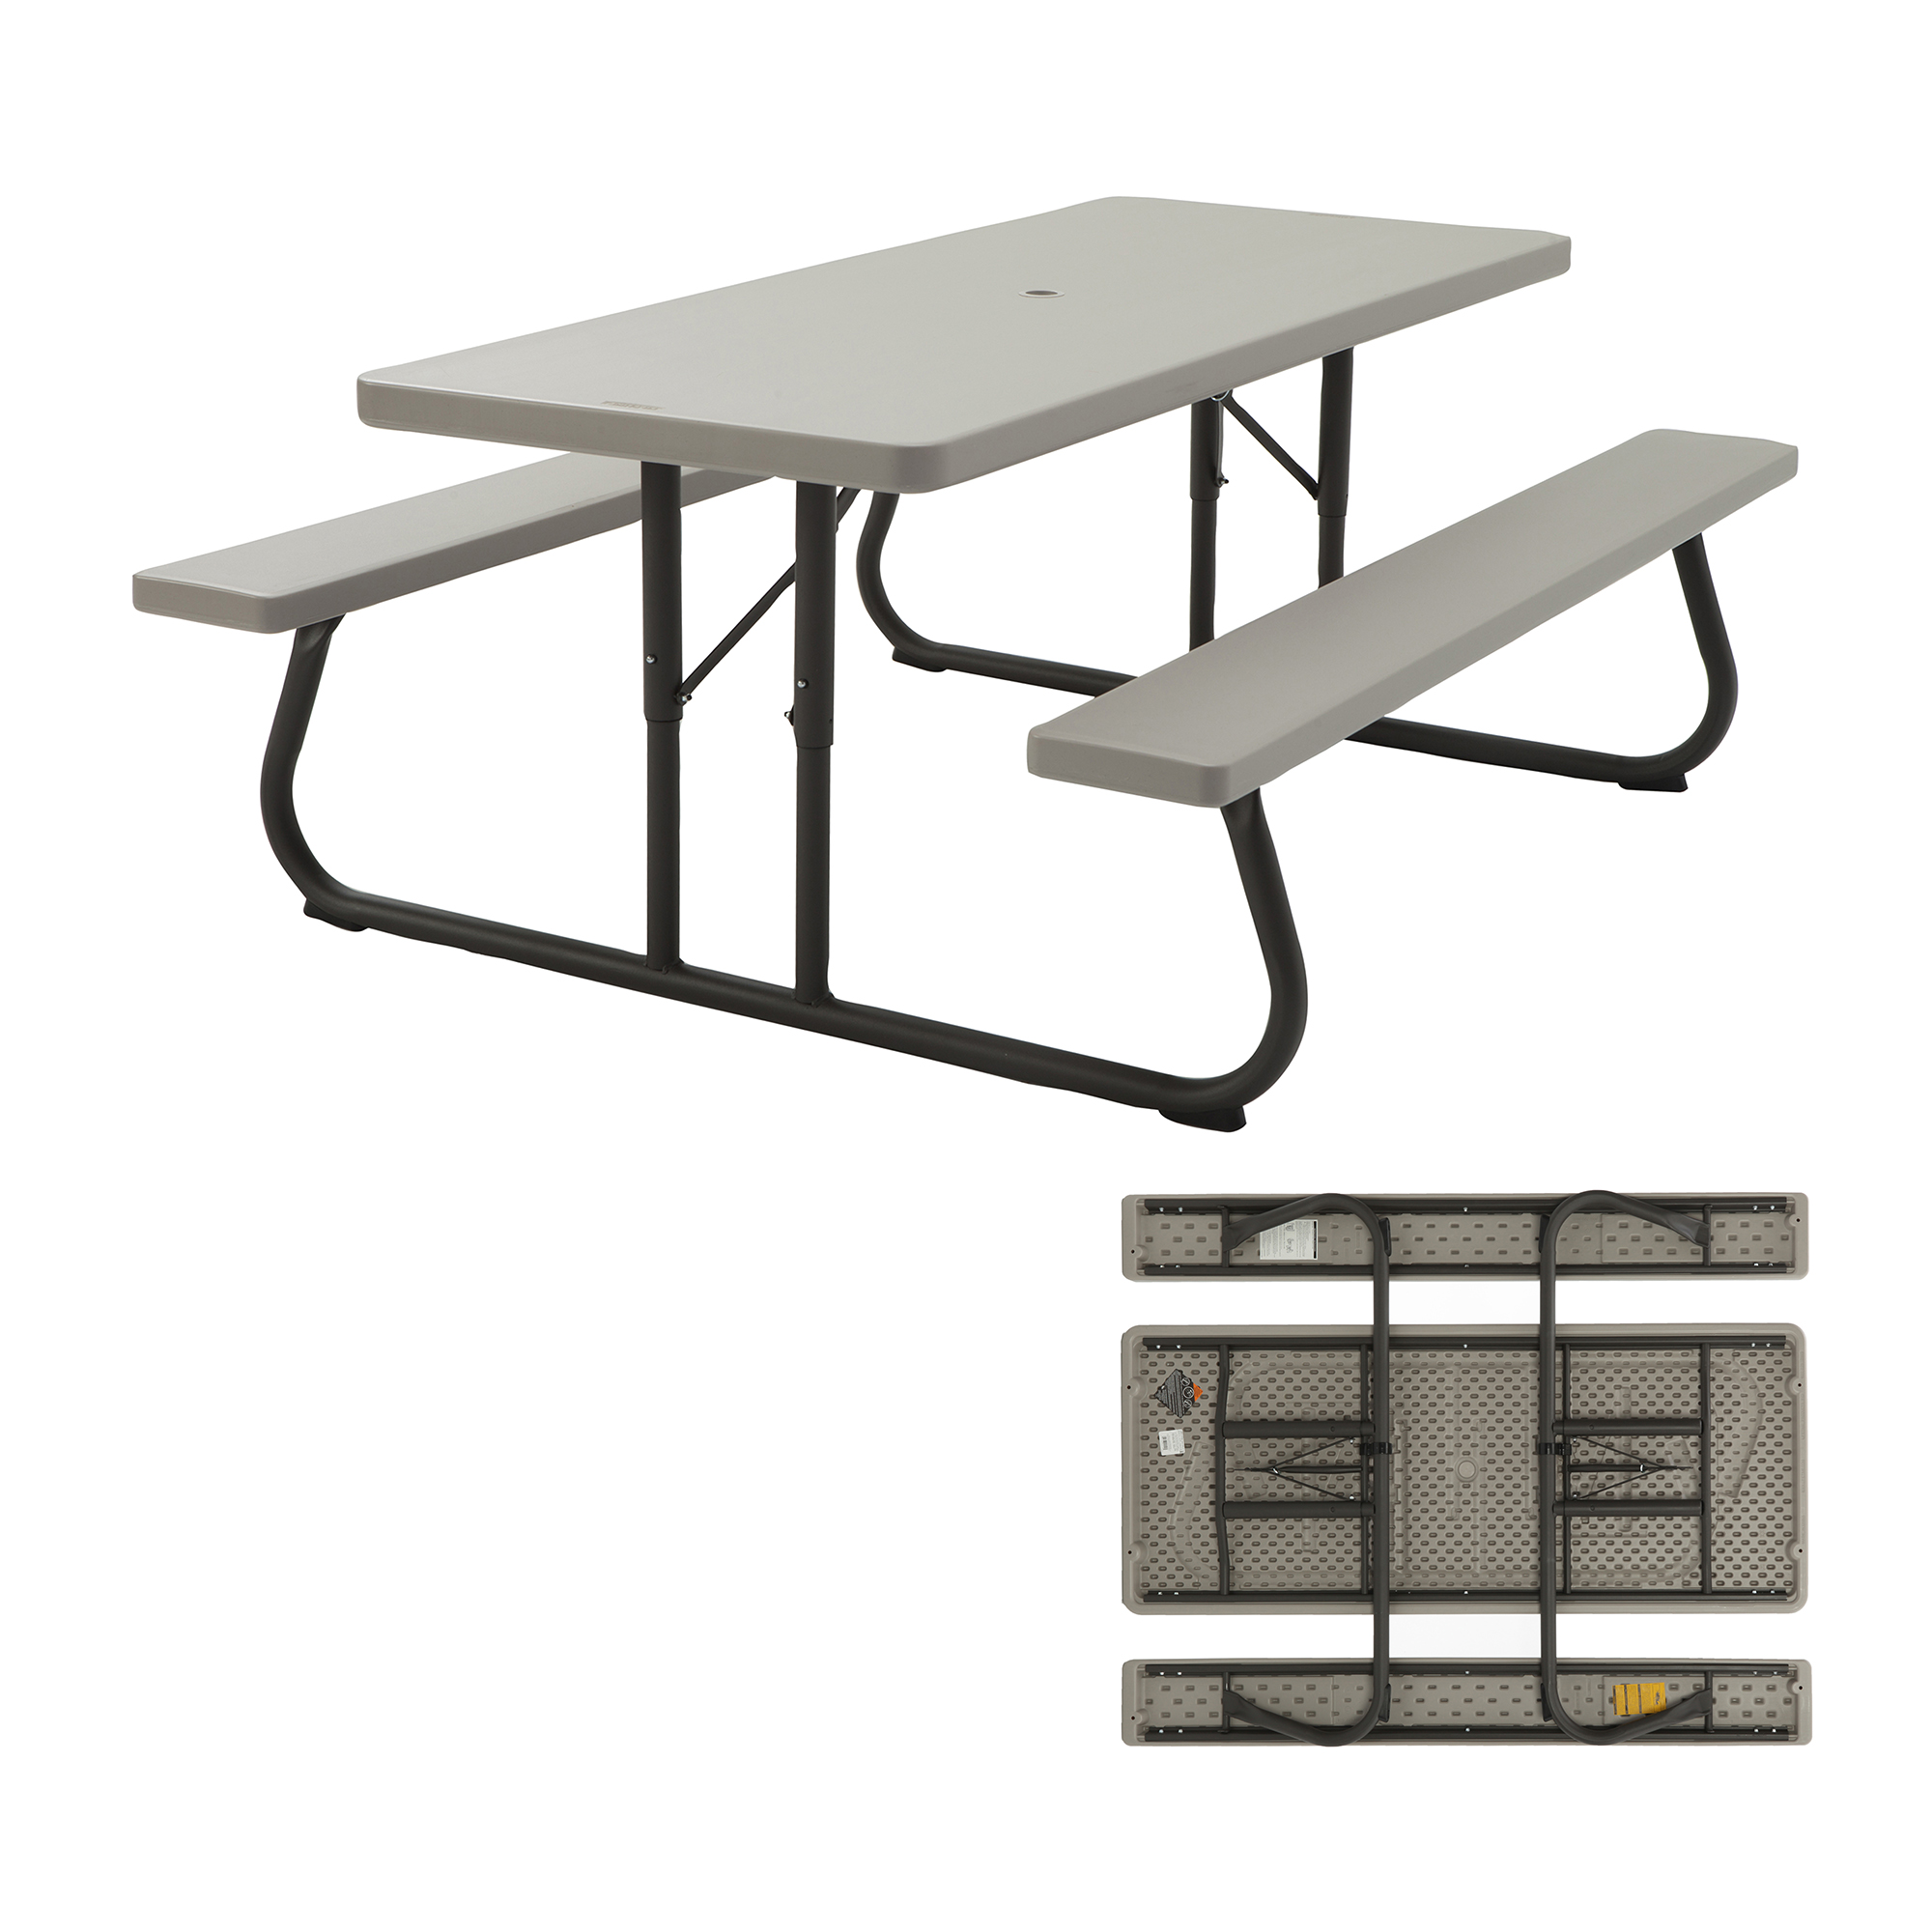 Lifetime 6 Foot Folding Picnic Table, Putty, 22119 - image 1 of 12